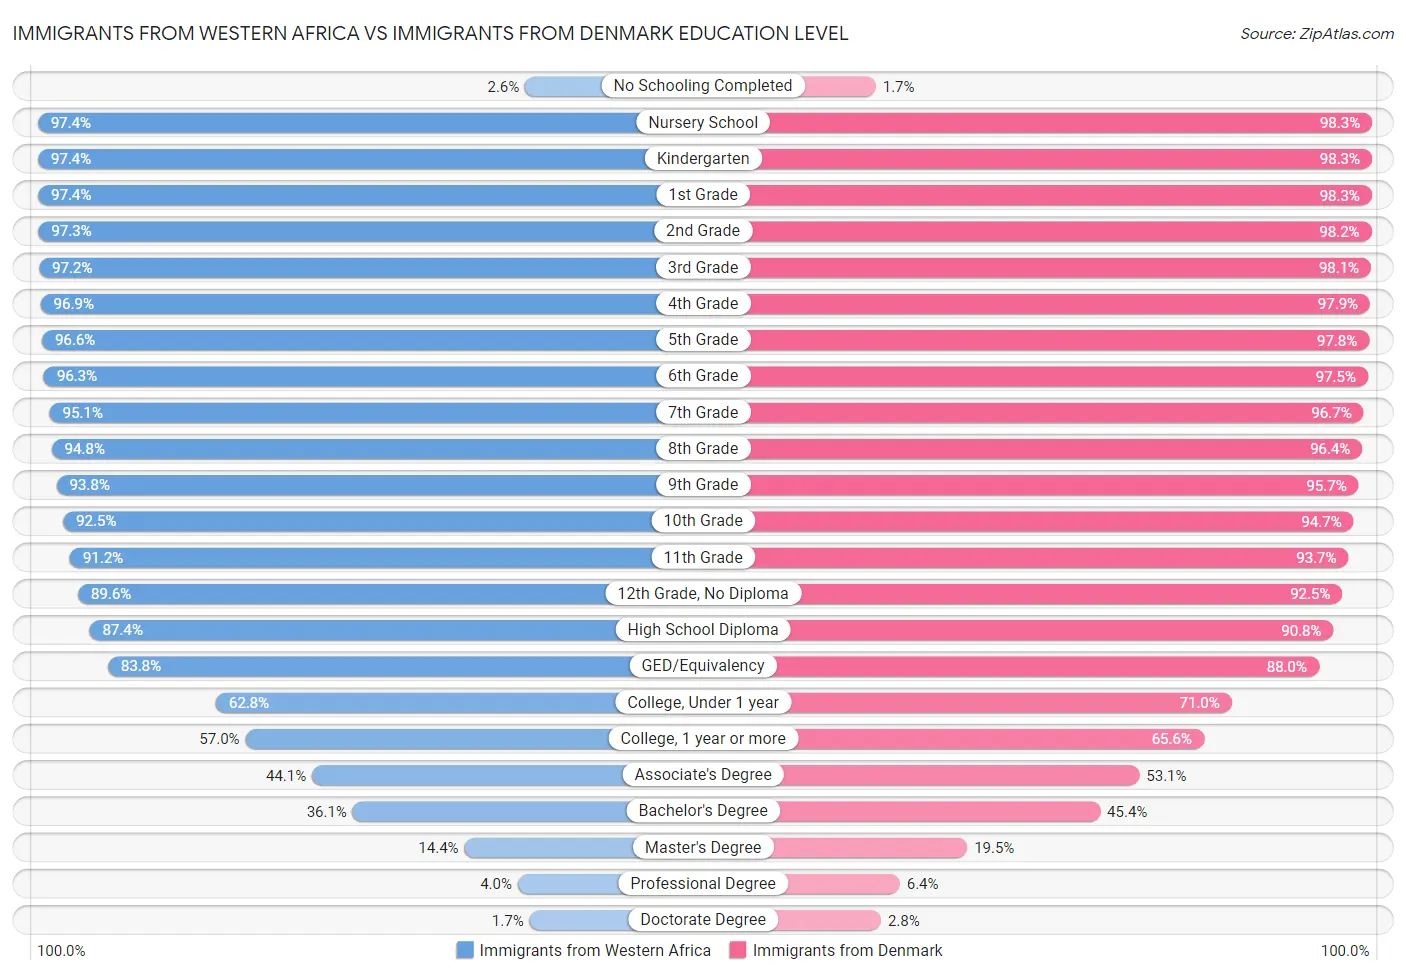 Immigrants from Western Africa vs Immigrants from Denmark Education Level